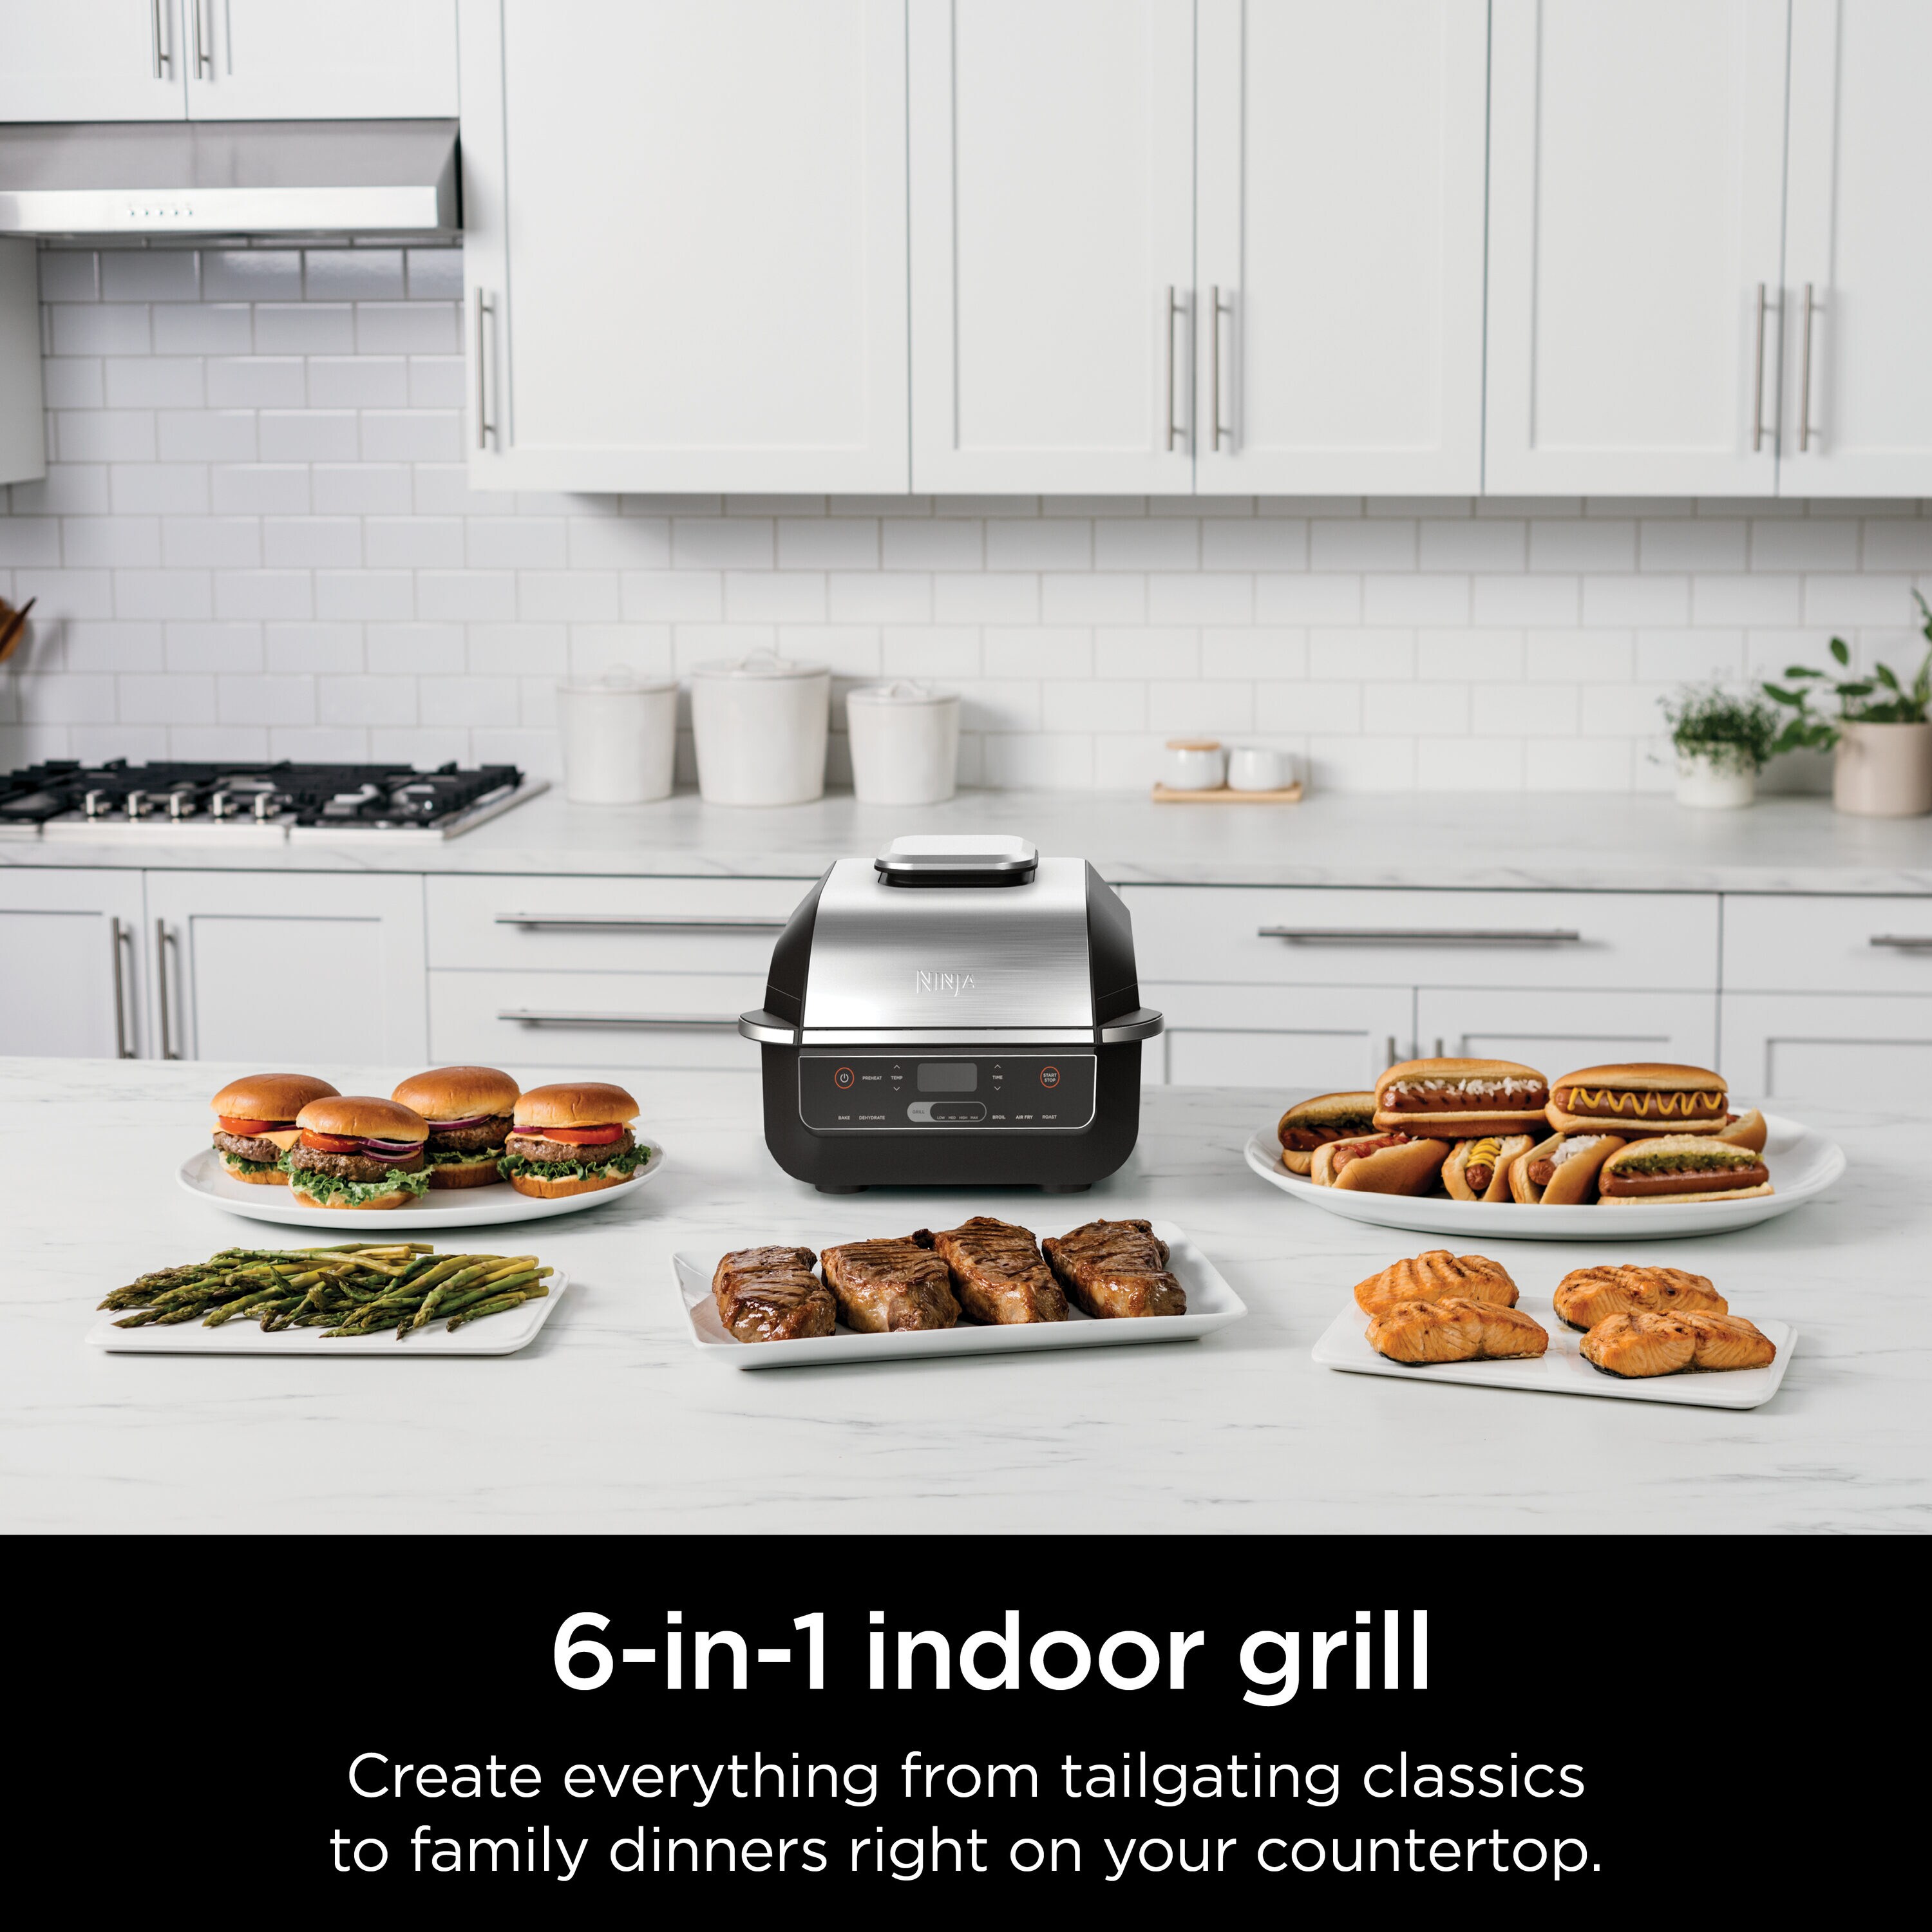 The Ninja Foodi XL Pro indoor grill is perfect for apartment living